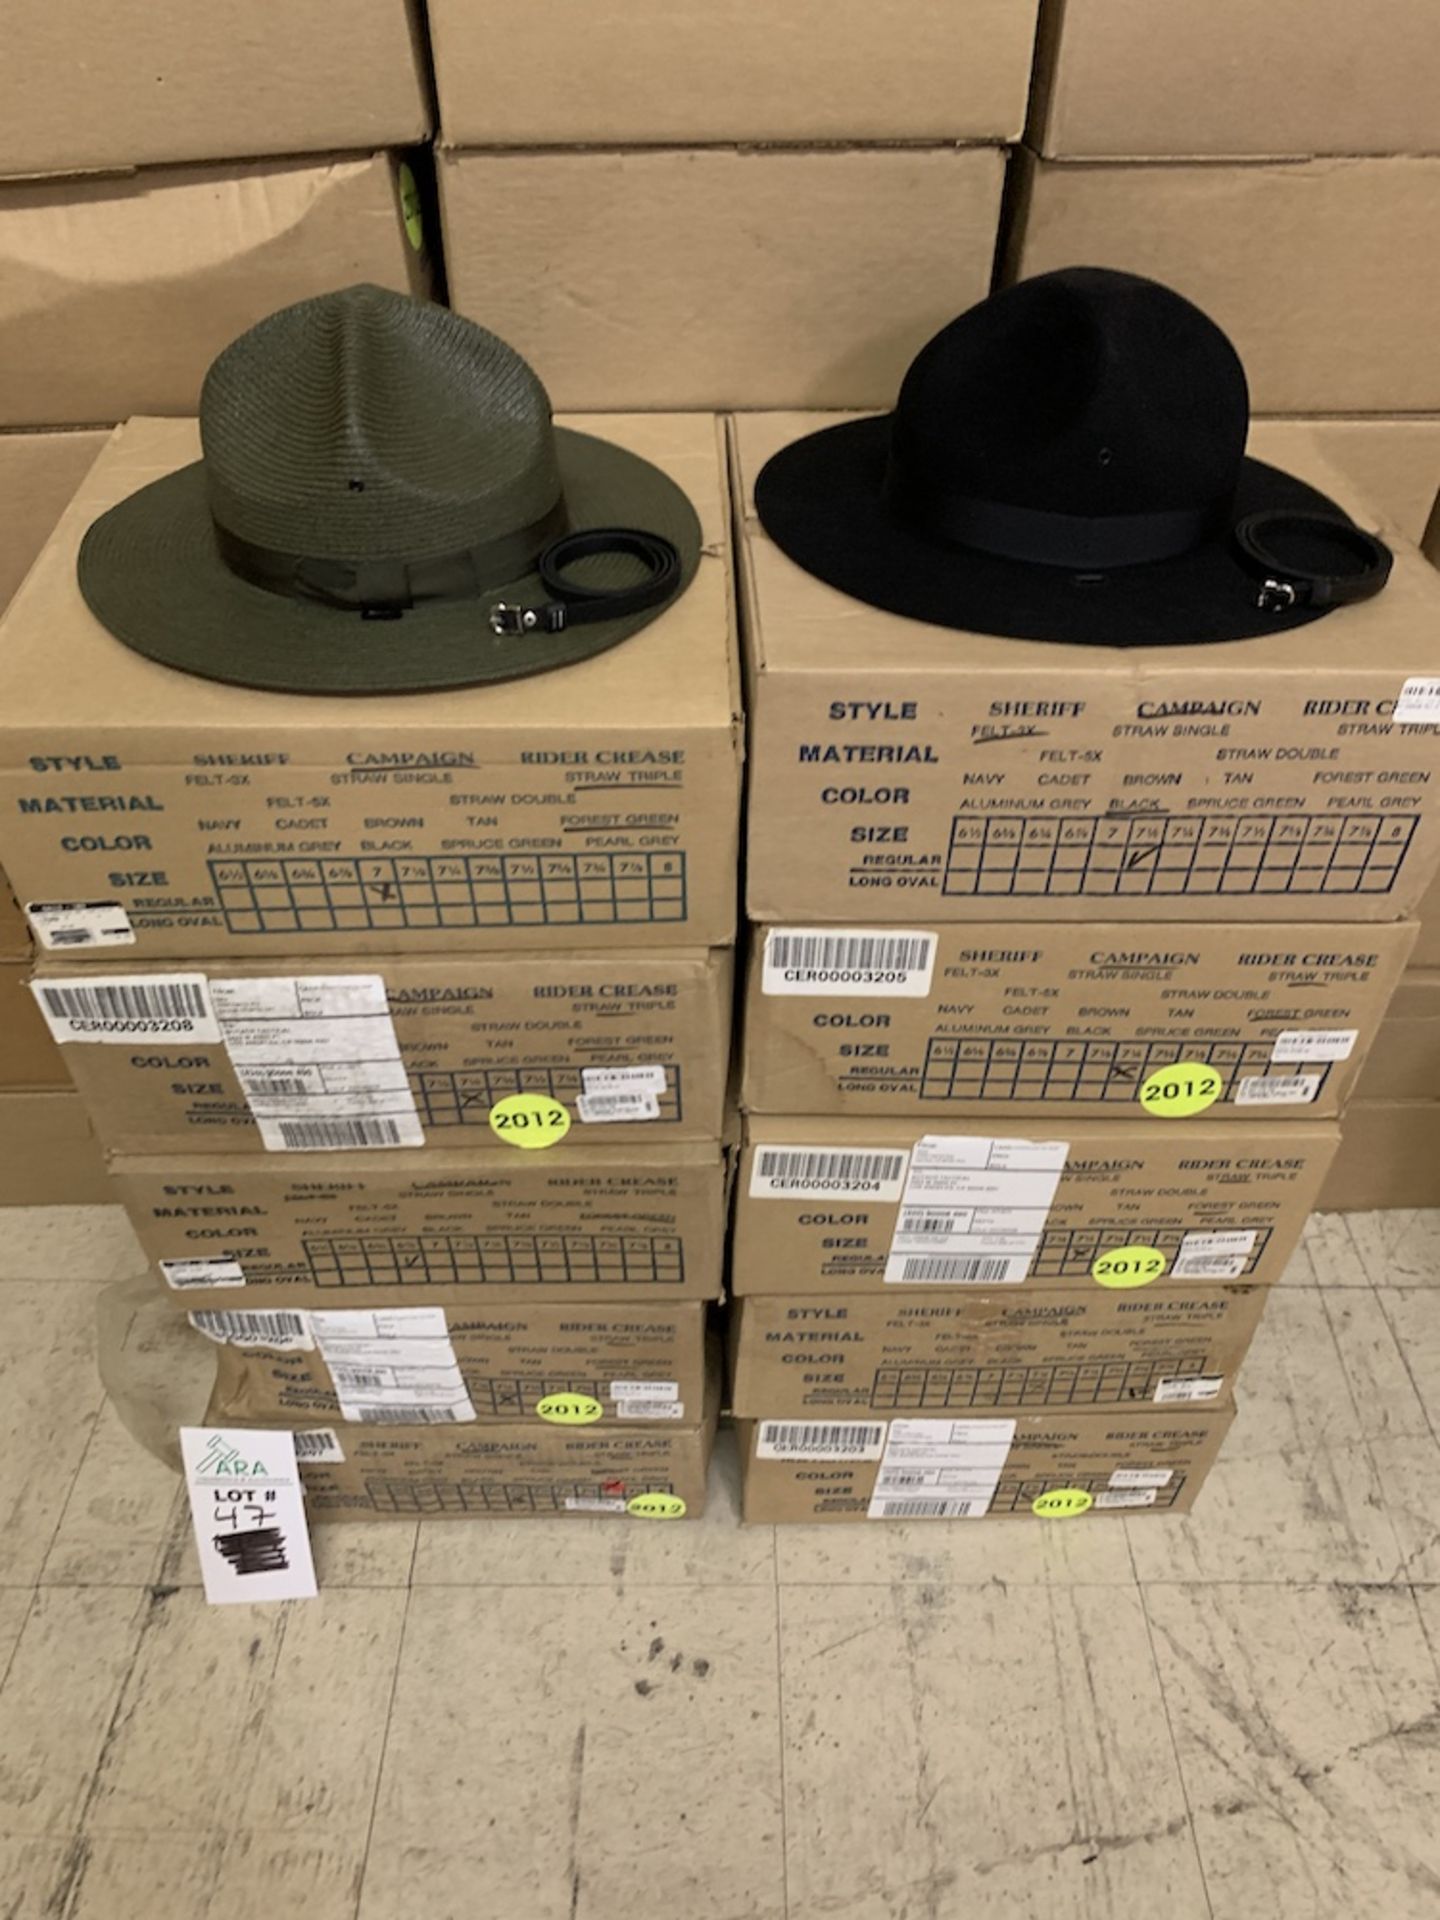 10 Campaign Uniform Hats, 9 The Lawman in Forest Green, 1 Campaign Black Felt Beaver Quality, New